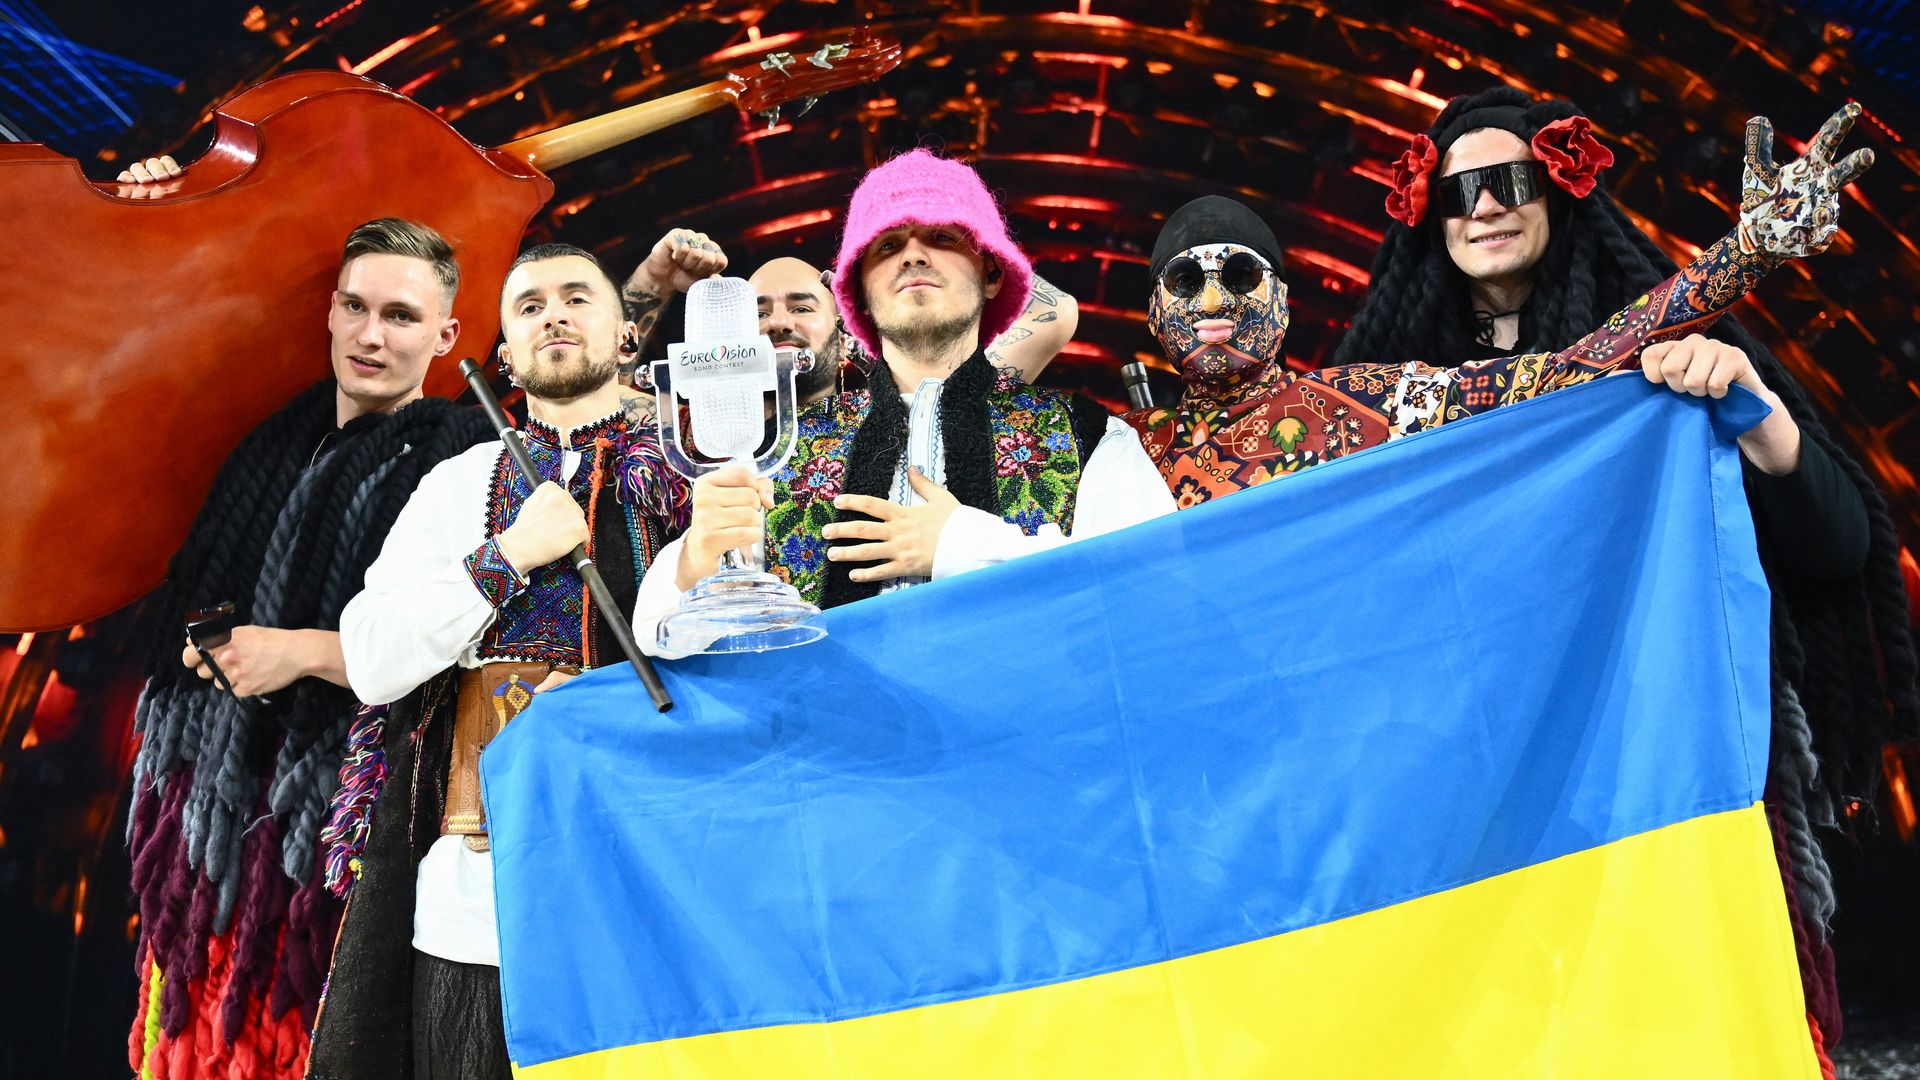 Members of the band "Kalush Orchestra" pose onstage with the winner's trophy and Ukraine's flags 